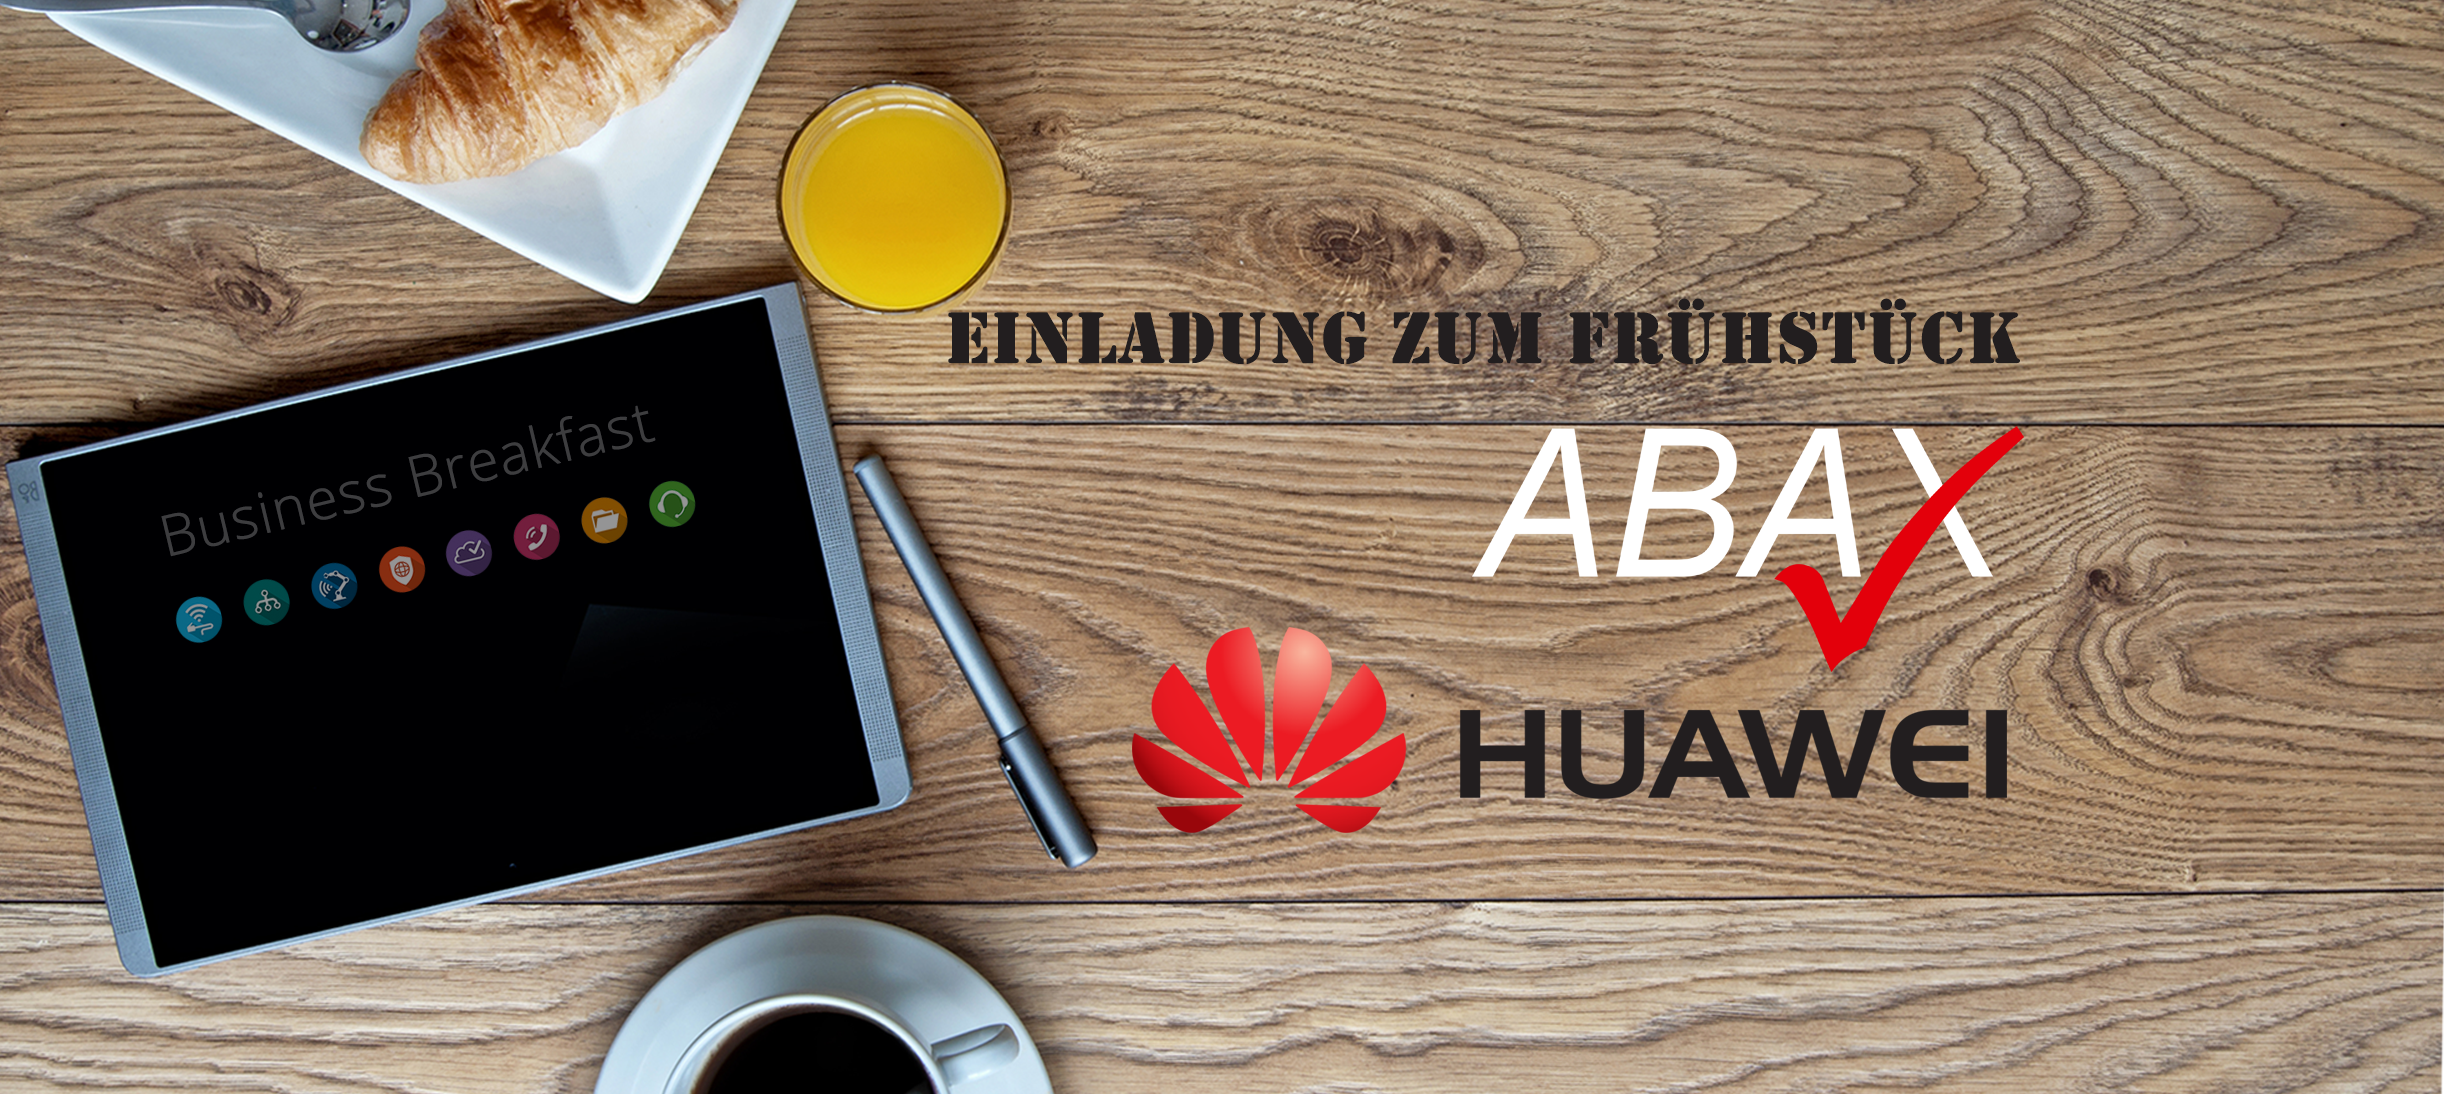 Business Breakfast - ABAX and HUAWEI - 25hours Hotel Vienna